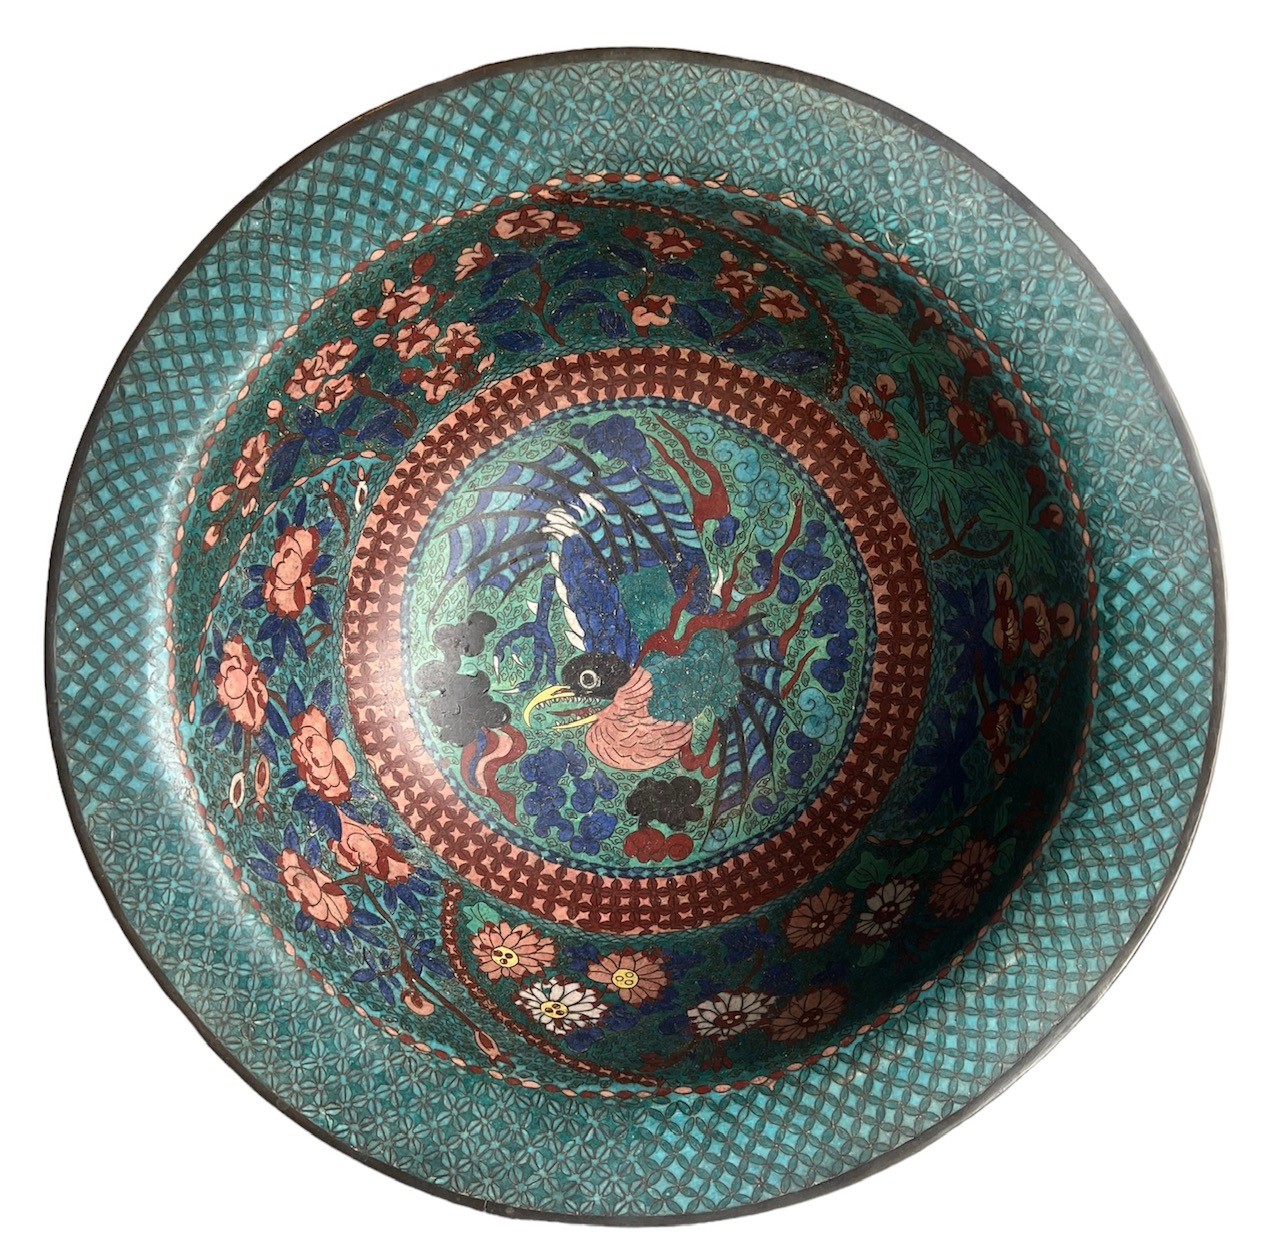 A LARGE CHINESE LATE MING DYNASTY 17TH CENTURY CLOISONNÉ BOWL Of waisted circular form with a flared